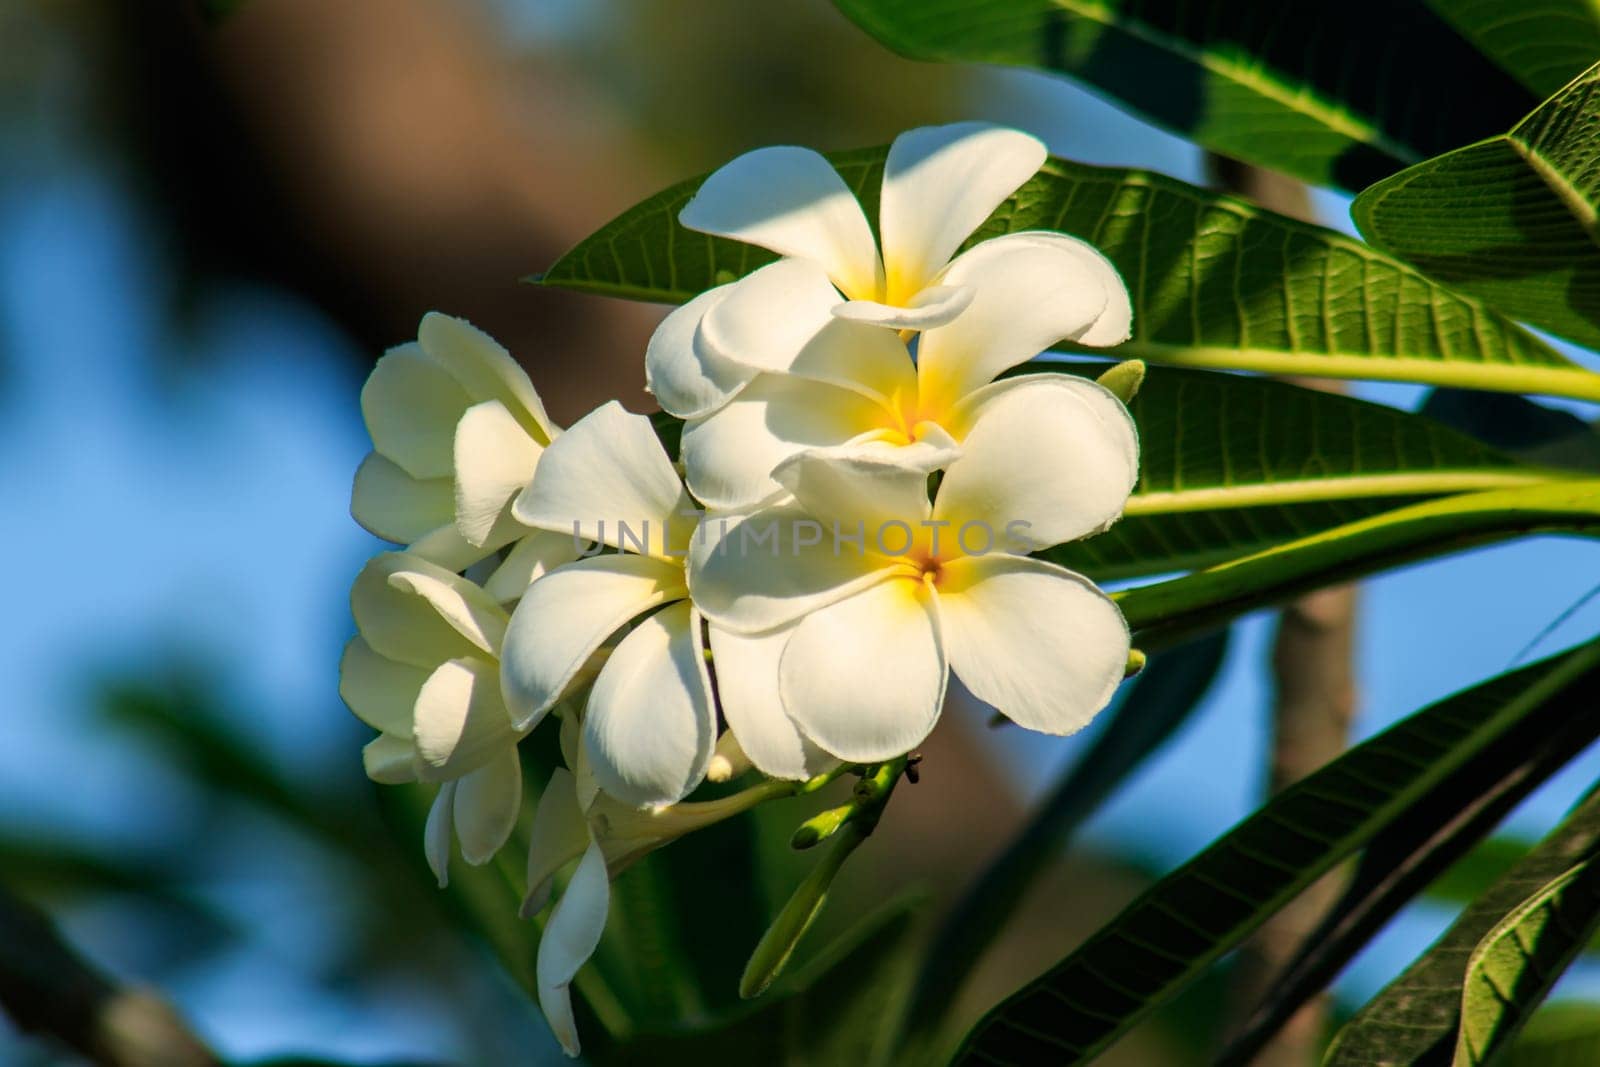 Plumeria, white, blooming Is the national flower of Laos